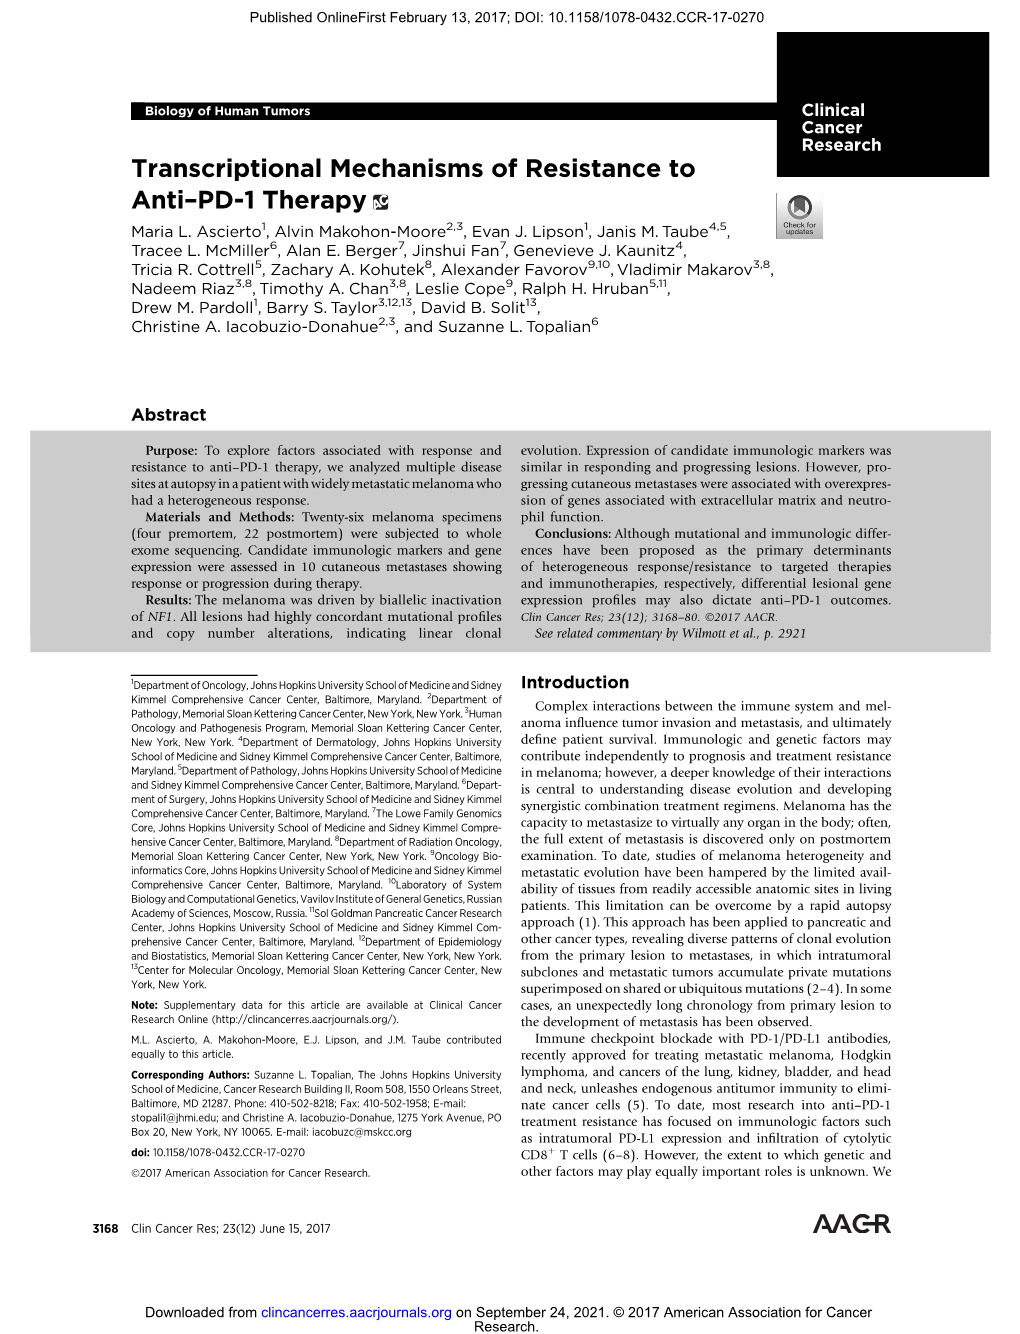 Transcriptional Mechanisms of Resistance to Anti–PD-1 Therapy Maria L